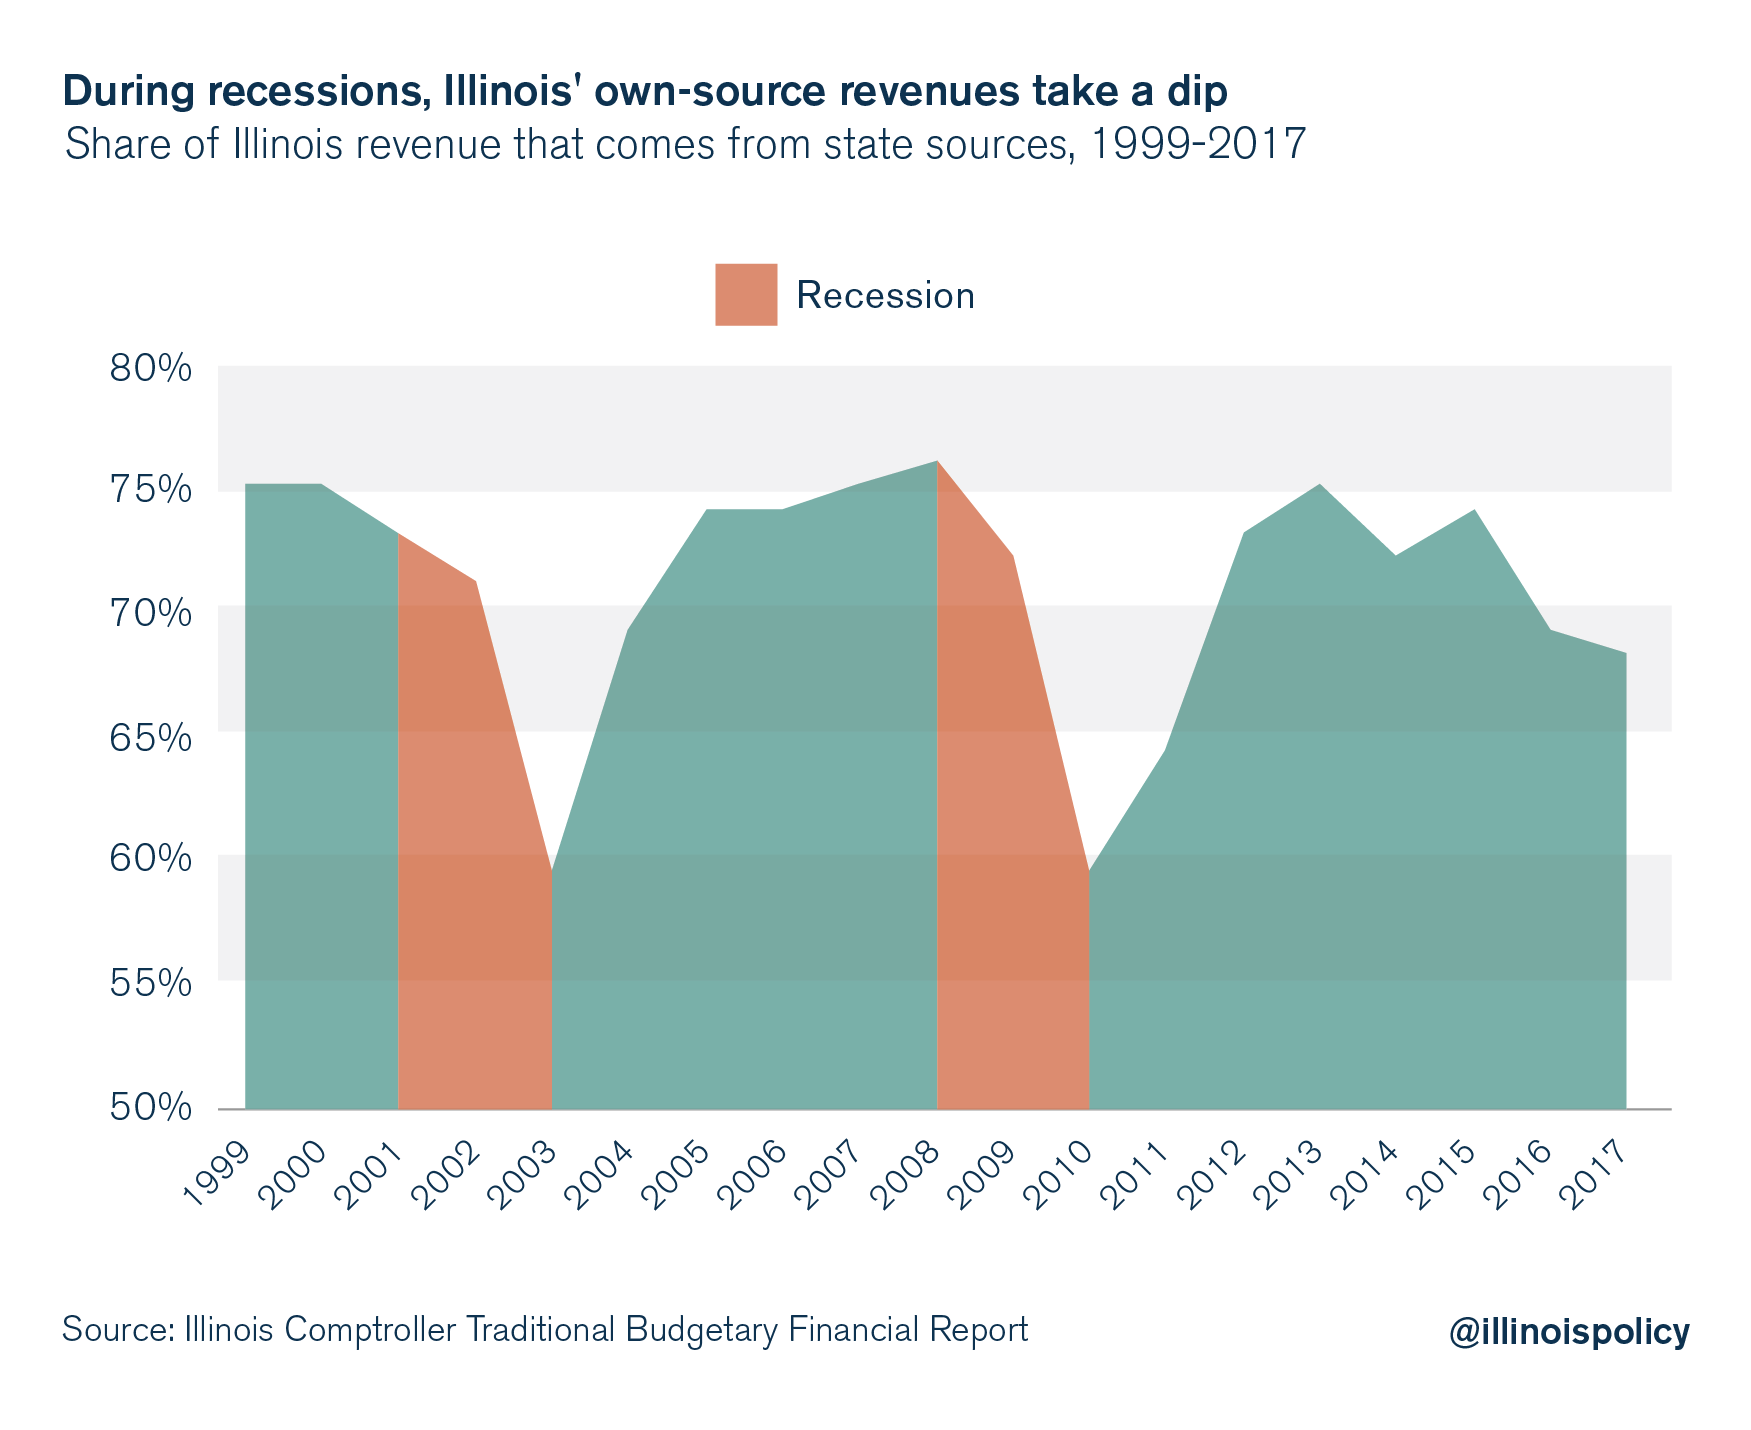 During recessions, Illinois' own-source revenues take a dip